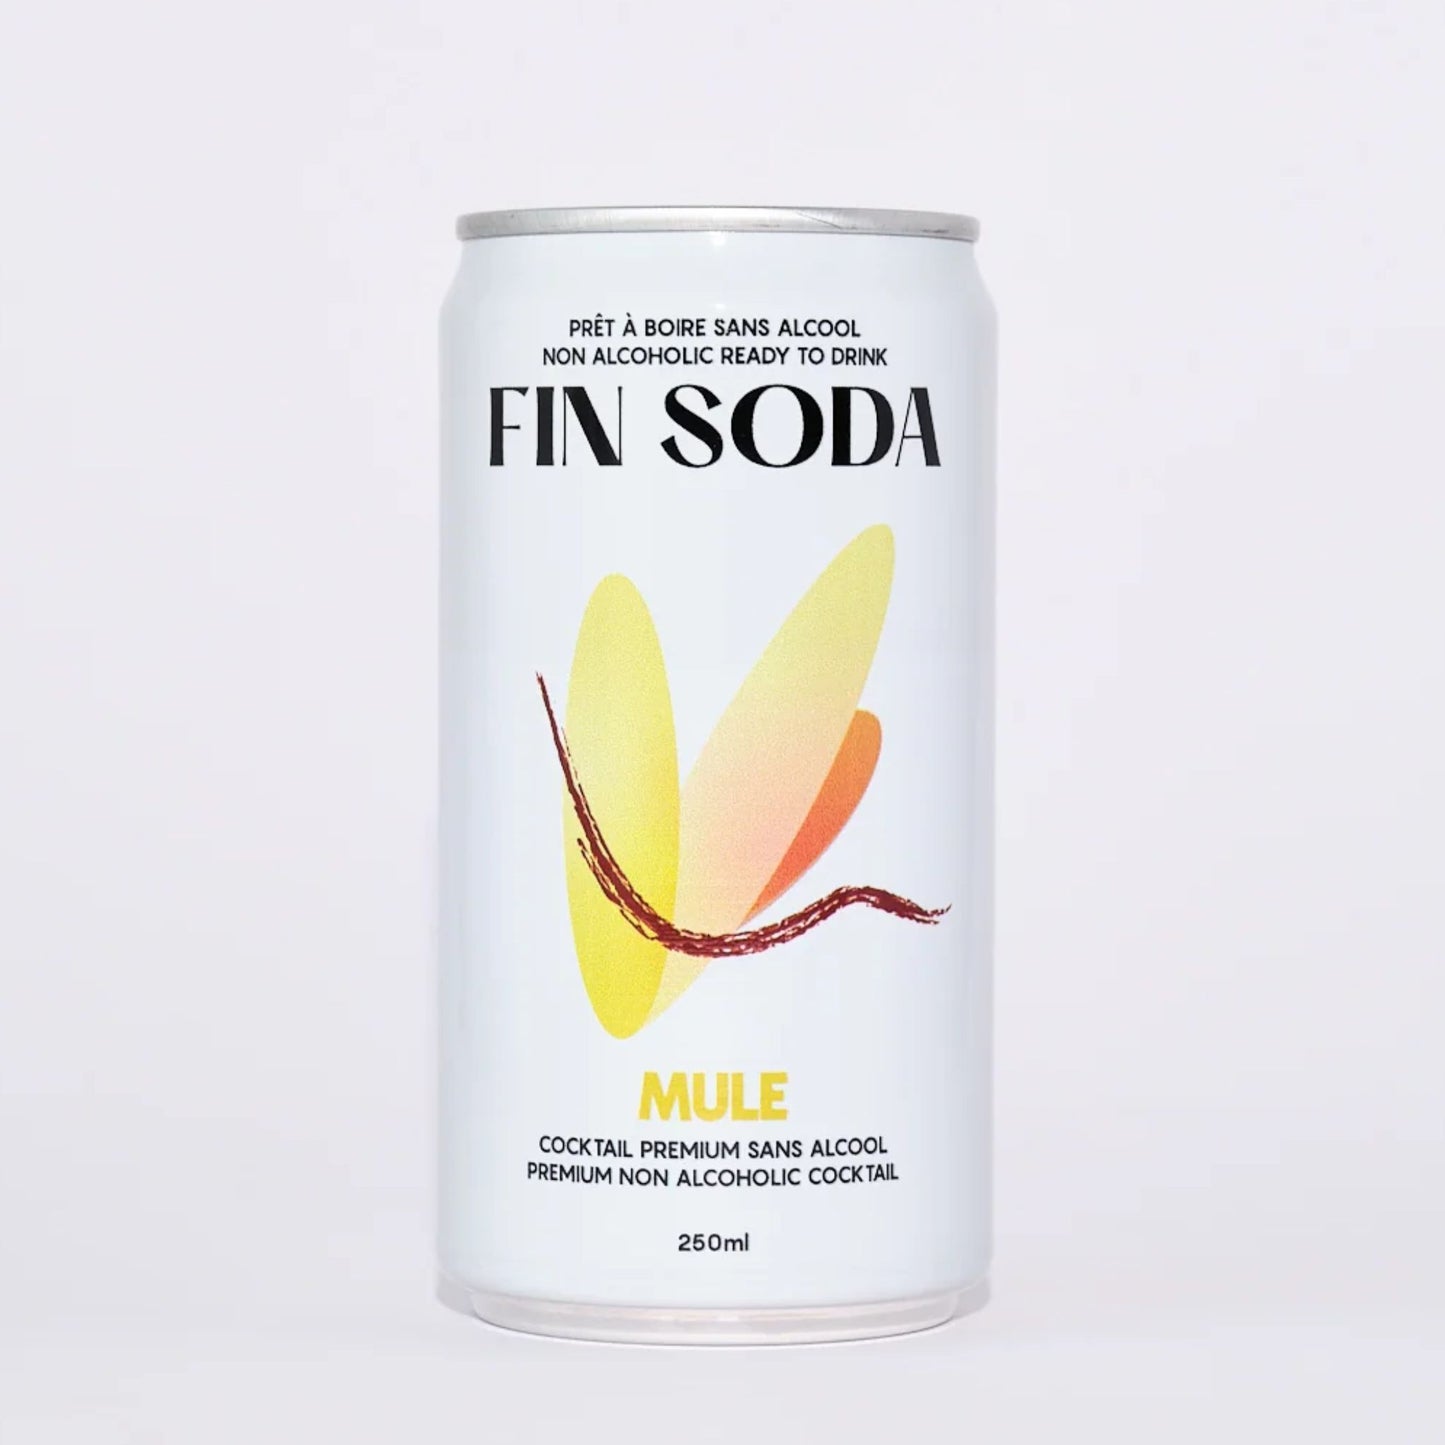 Fin Soda Non-Alcoholic Ready to Drink Mule is available at Knyota Non-Alcoholic Drinks.